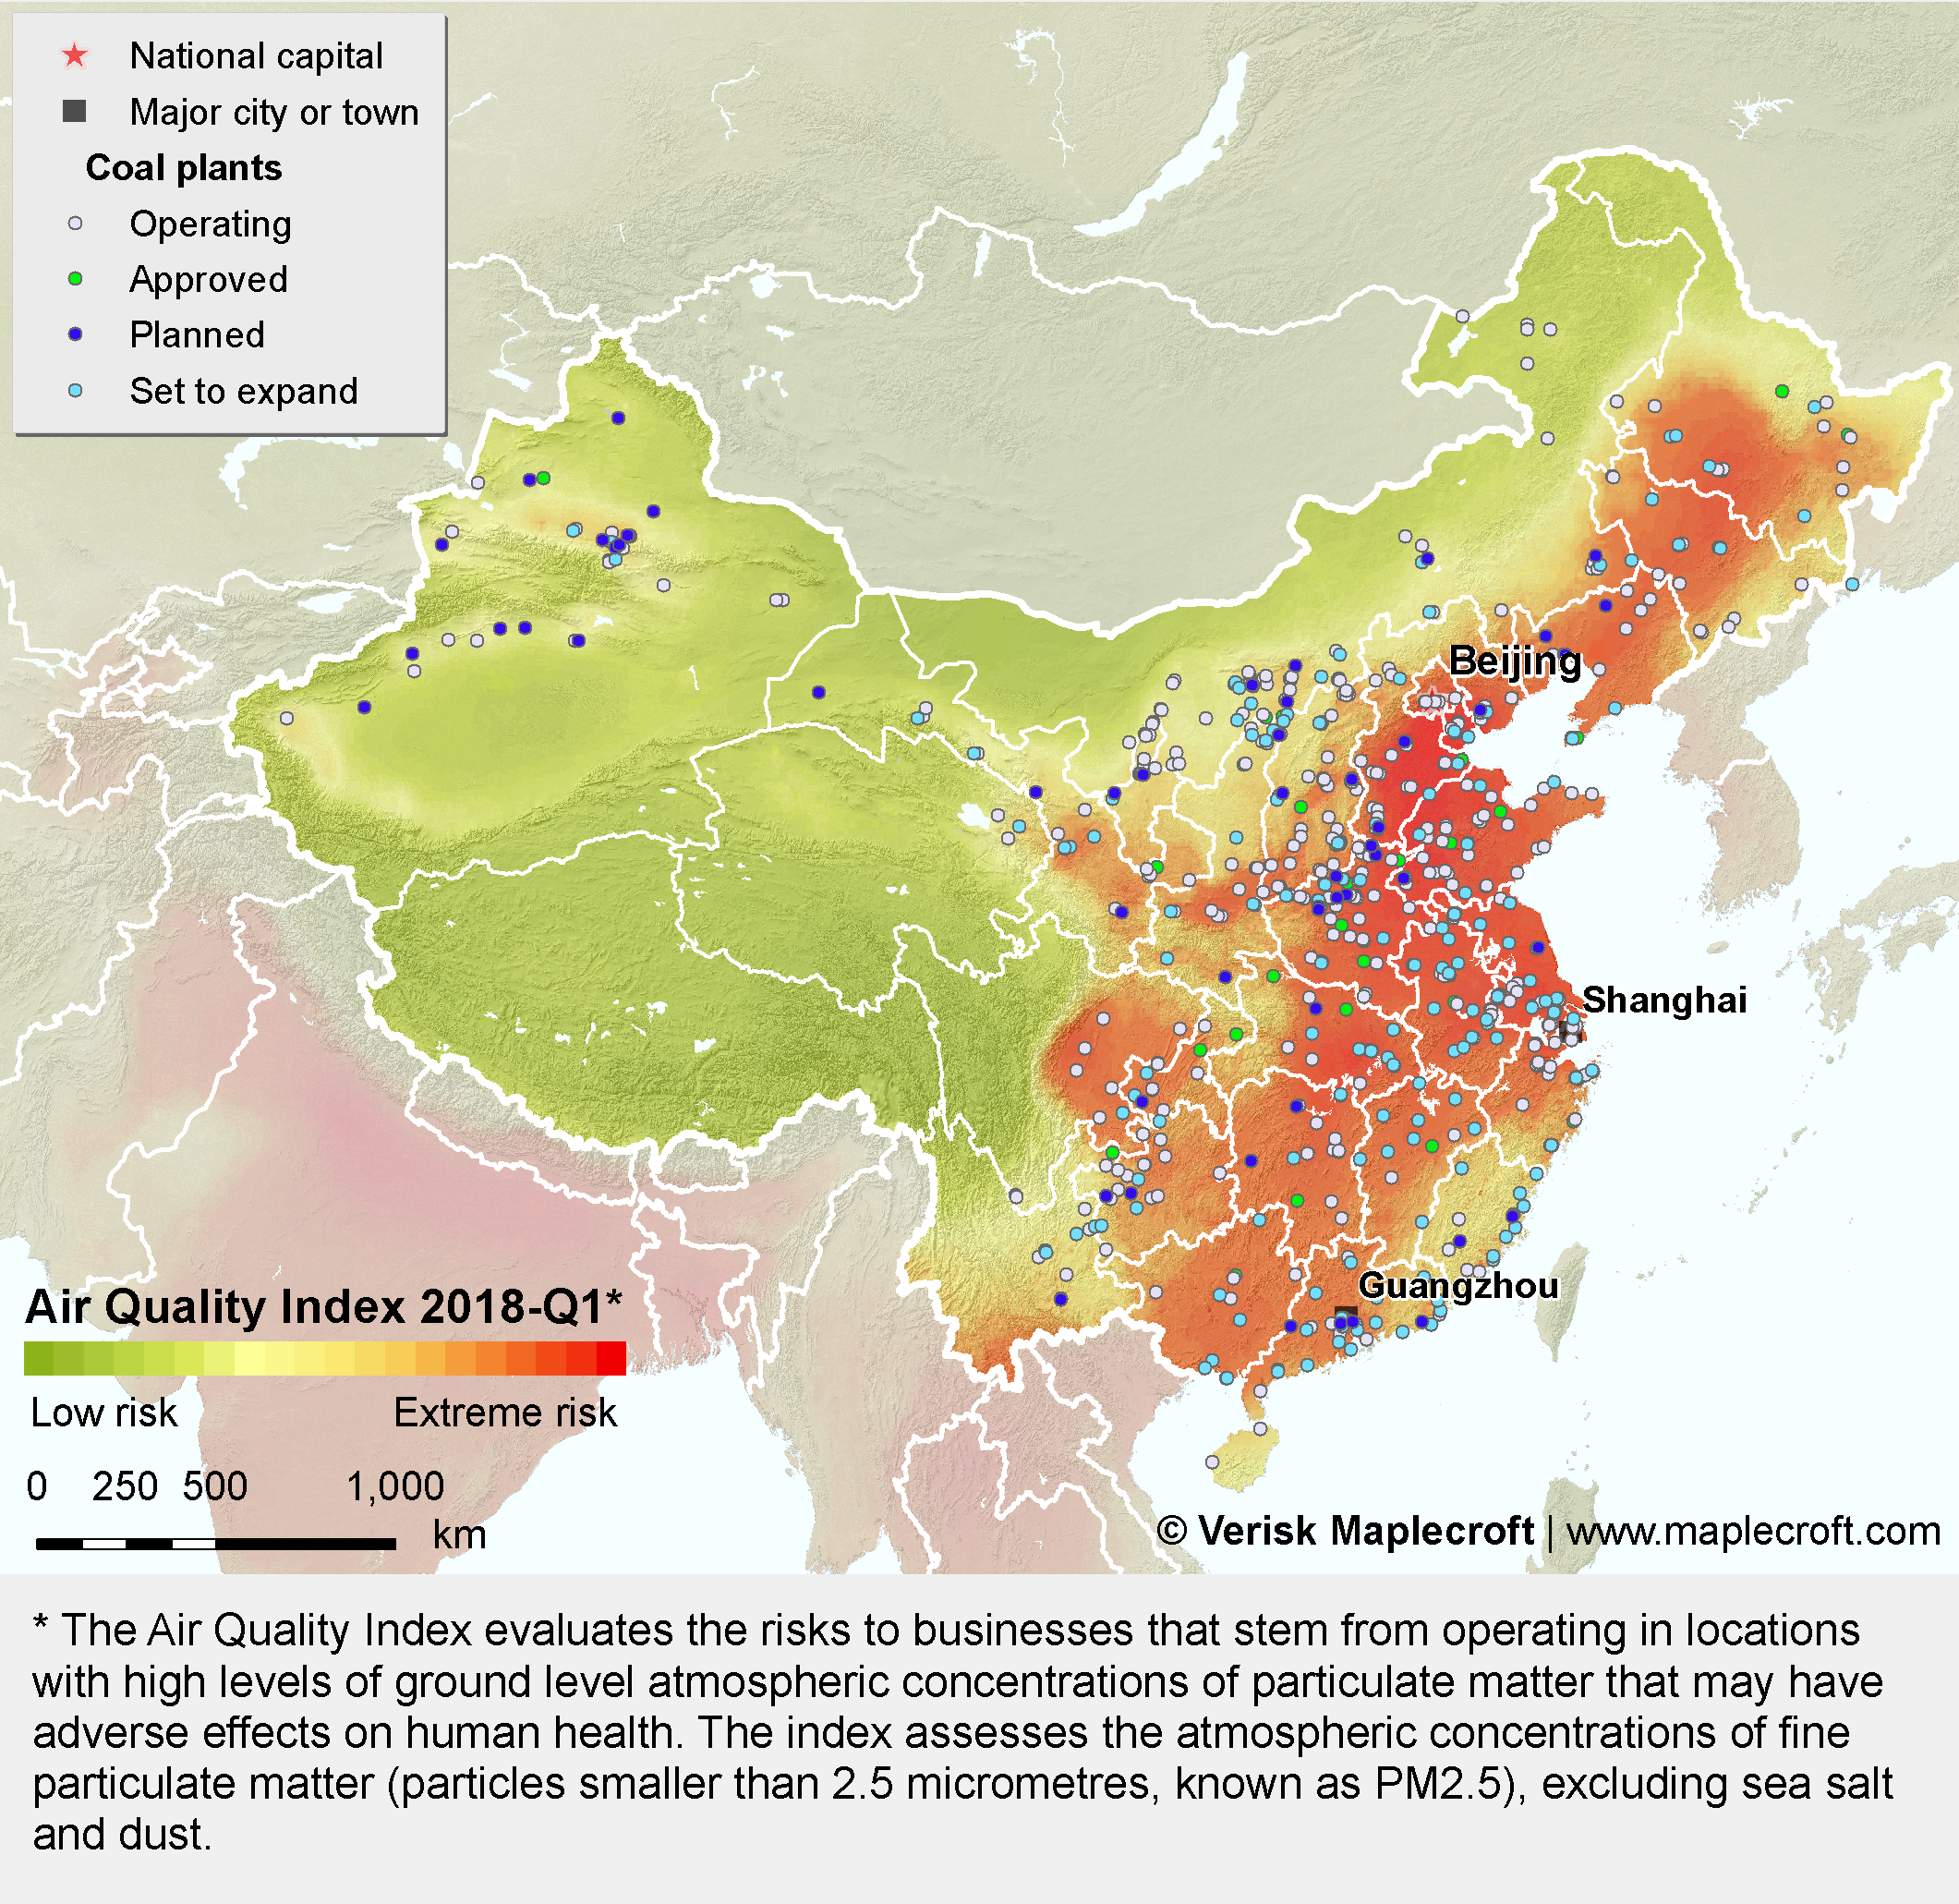 Coal the key to China's war on pollution_Make or break year for Chinas enviro credentials